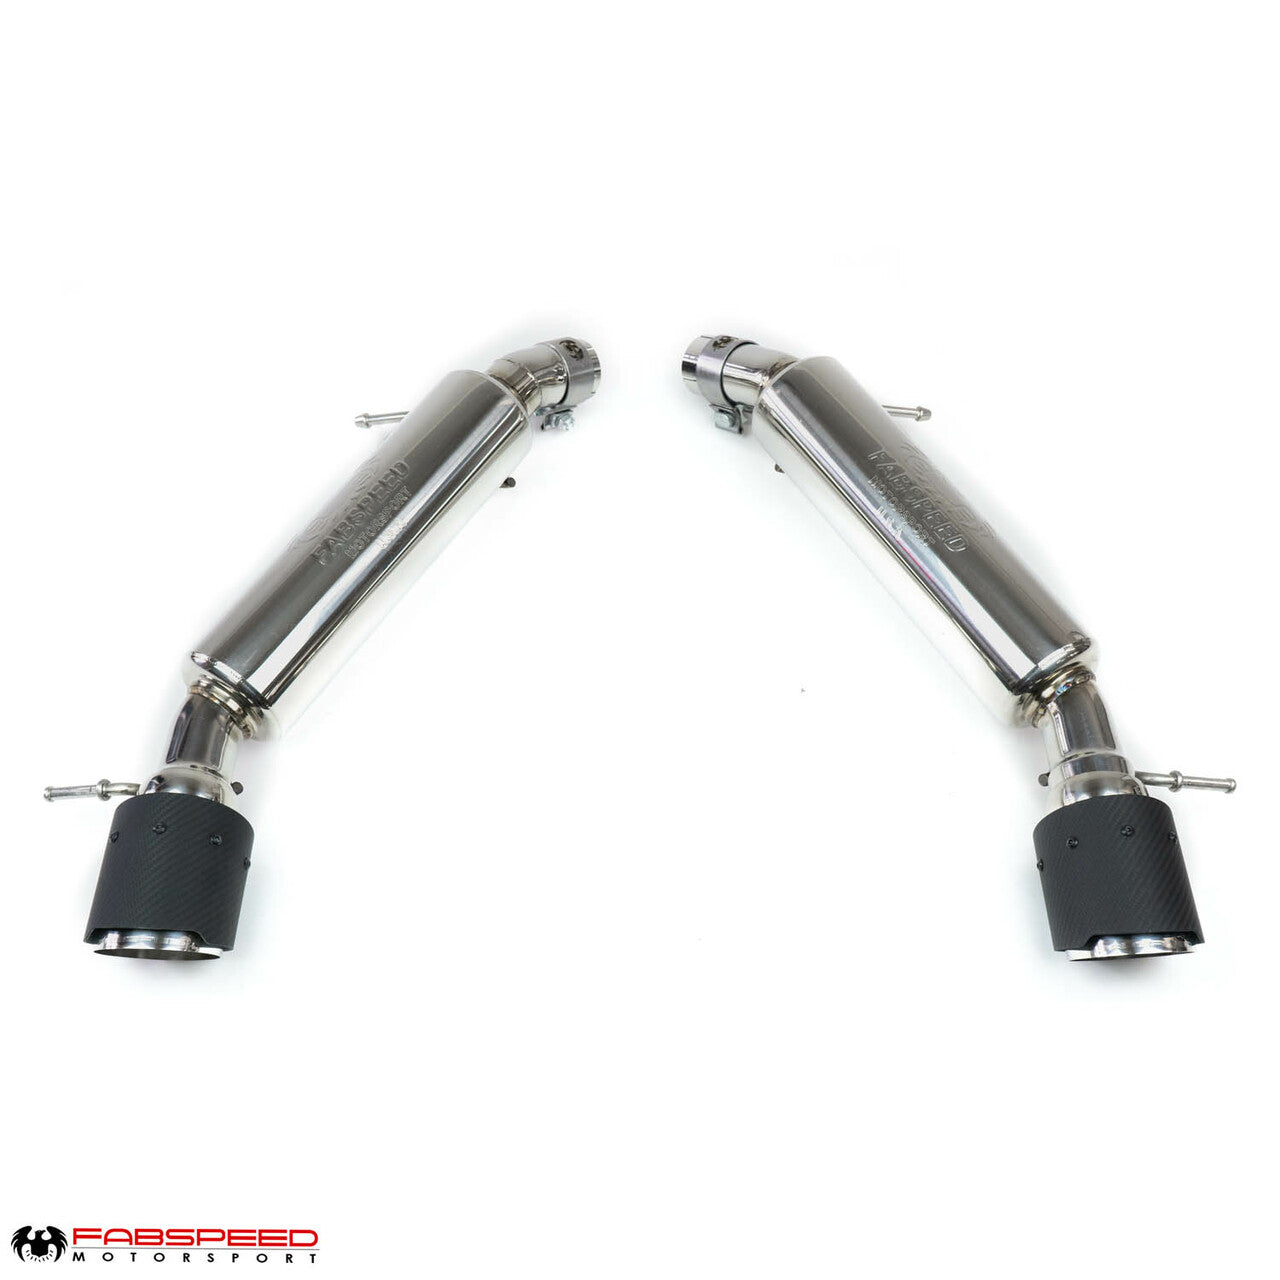 Fabspeed Range Rover Sport Supercharged Supercup Exhaust System (2014-2017) - 0